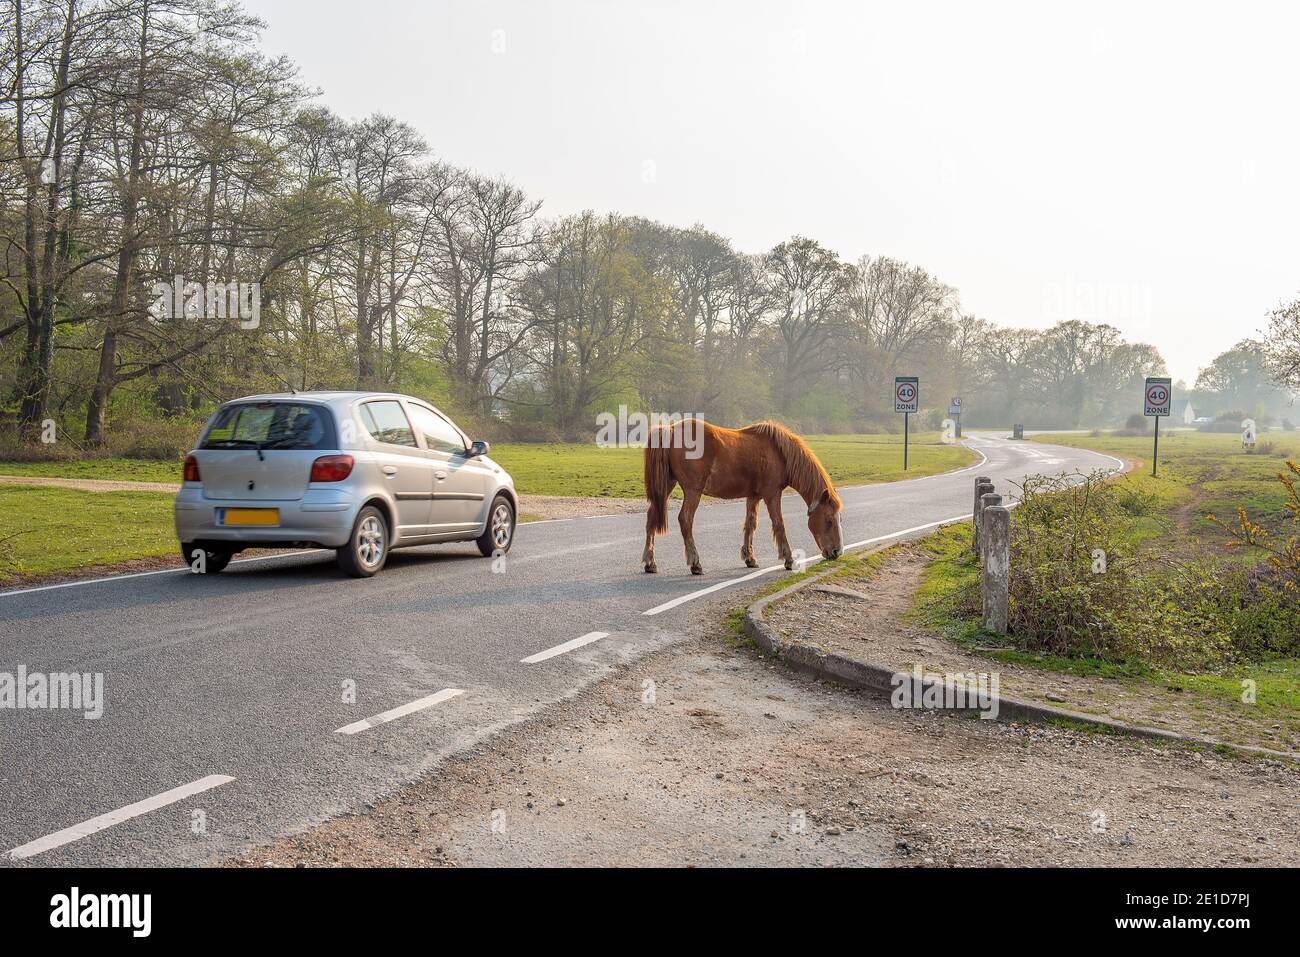 Beaulieu, Hampshire, UK - A car drives past New Forest donkeys and ponies that wander freely in the New Forest. A sight not seen anywhere else in the Stock Photo